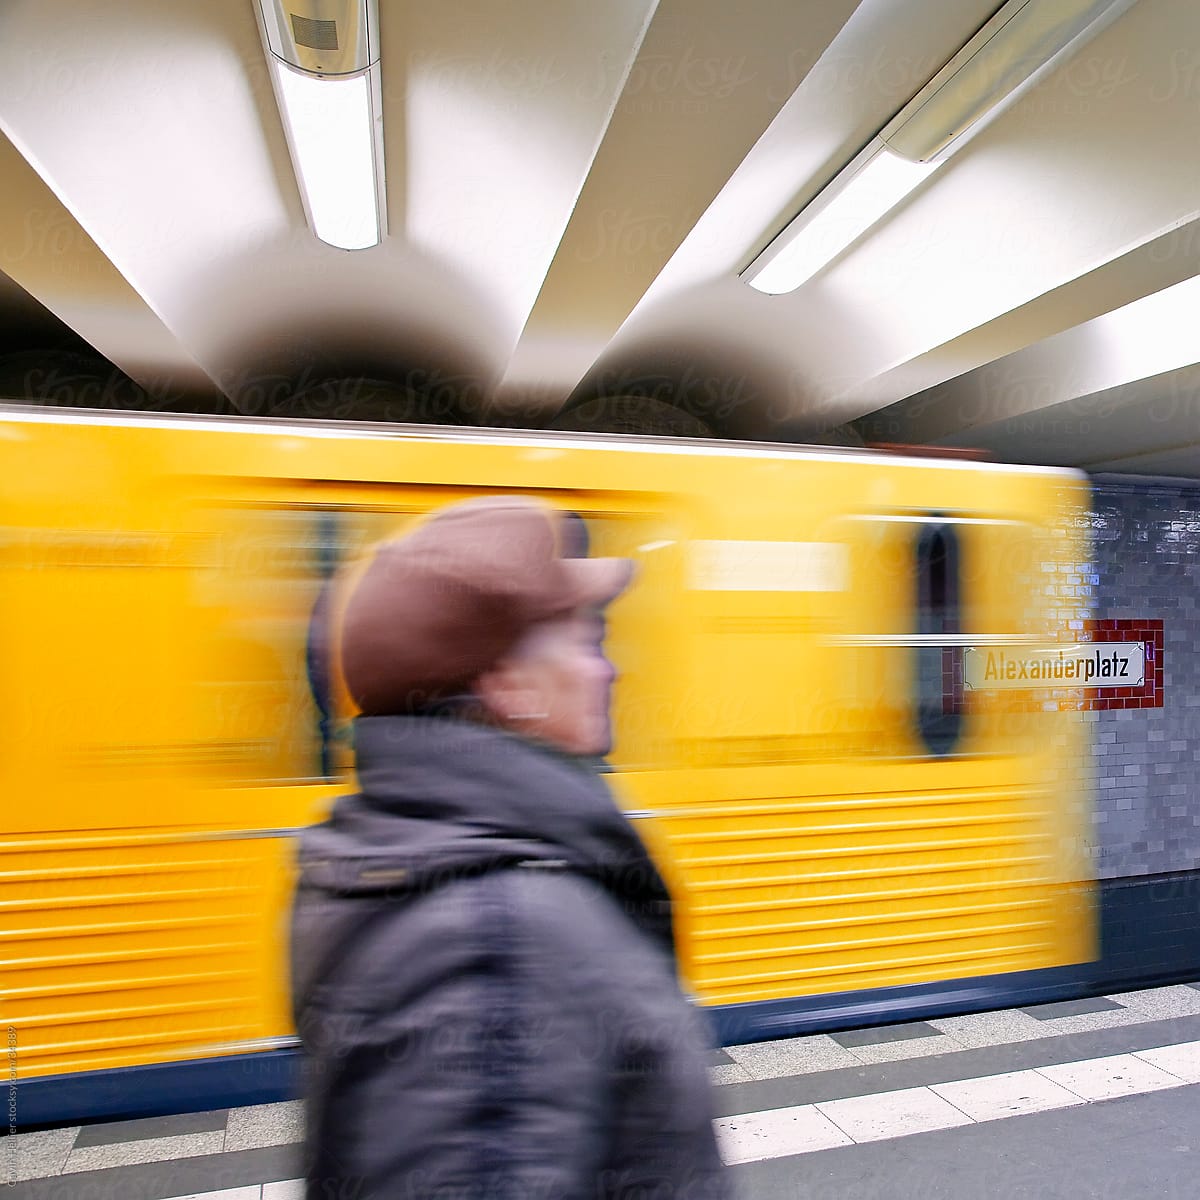 Europe, Germany, Berlin U-Bahn station  - moving train pulling into the station